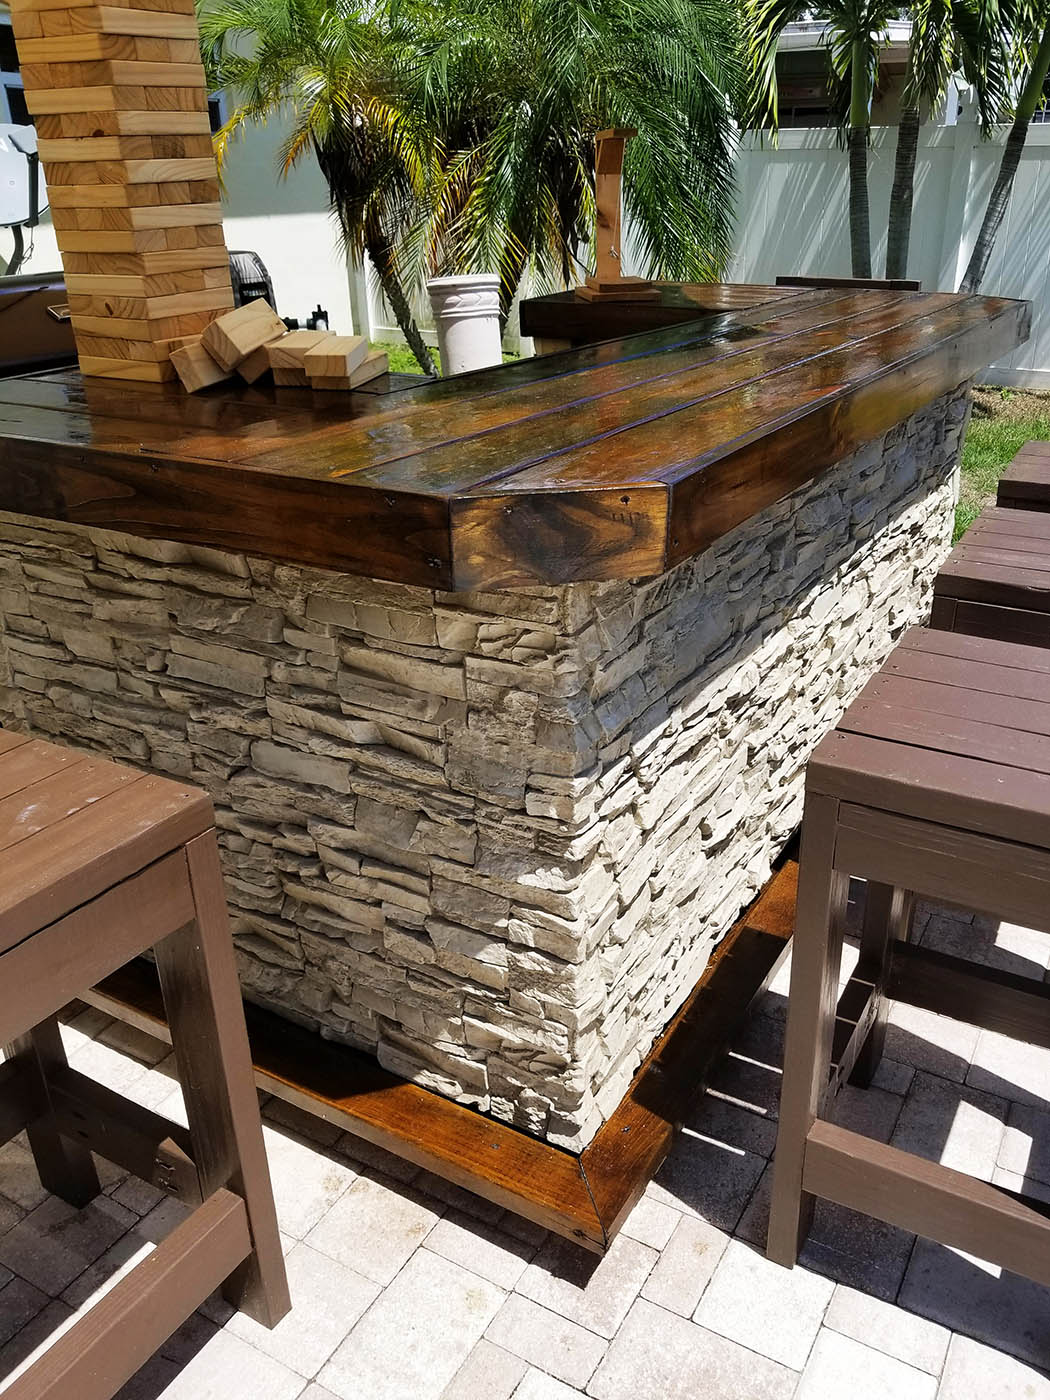 Designing a DIY outdoor bar with faux stone panels